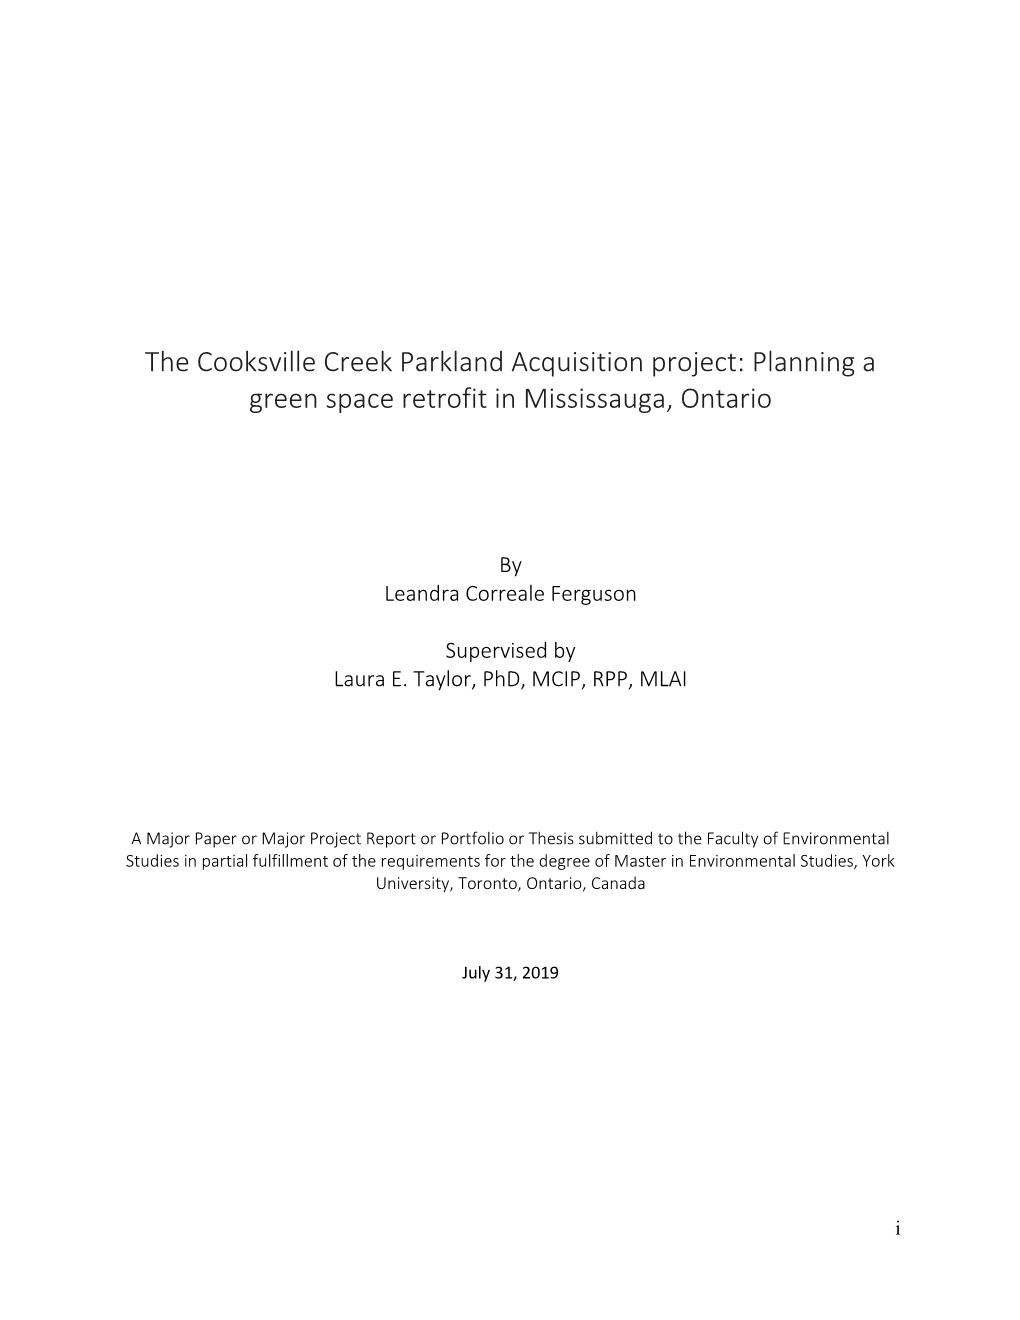 The Cooksville Creek Parkland Acquisition Project: Planning a Green Space Retrofit in Mississauga, Ontario